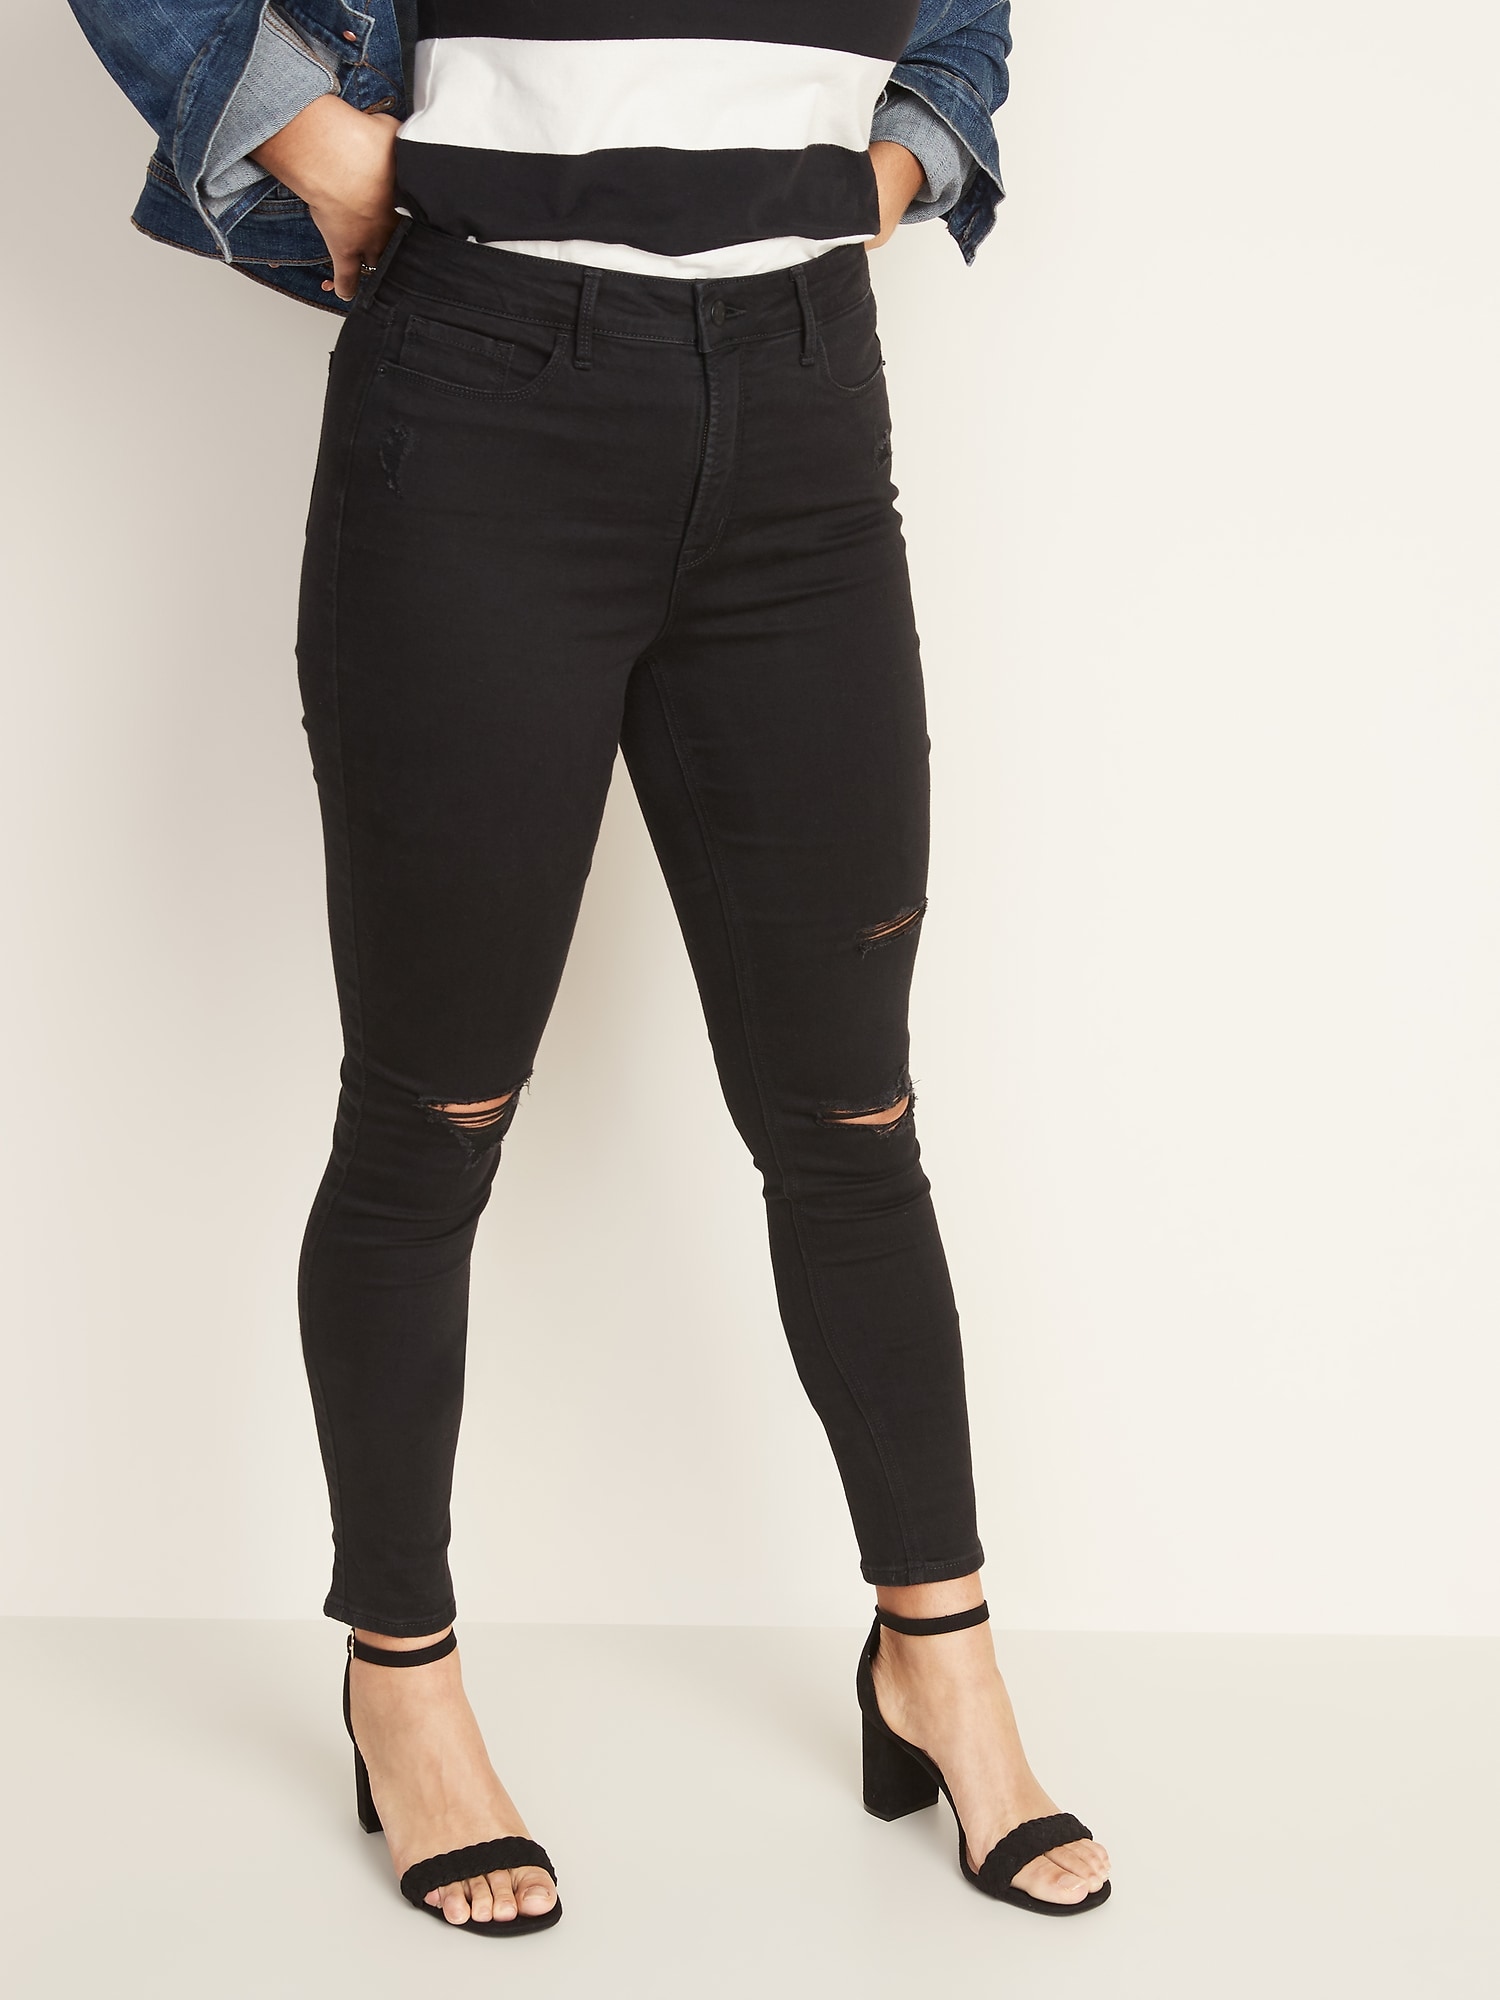 High-Waisted Distressed Rockstar Super Skinny Jeans For Women